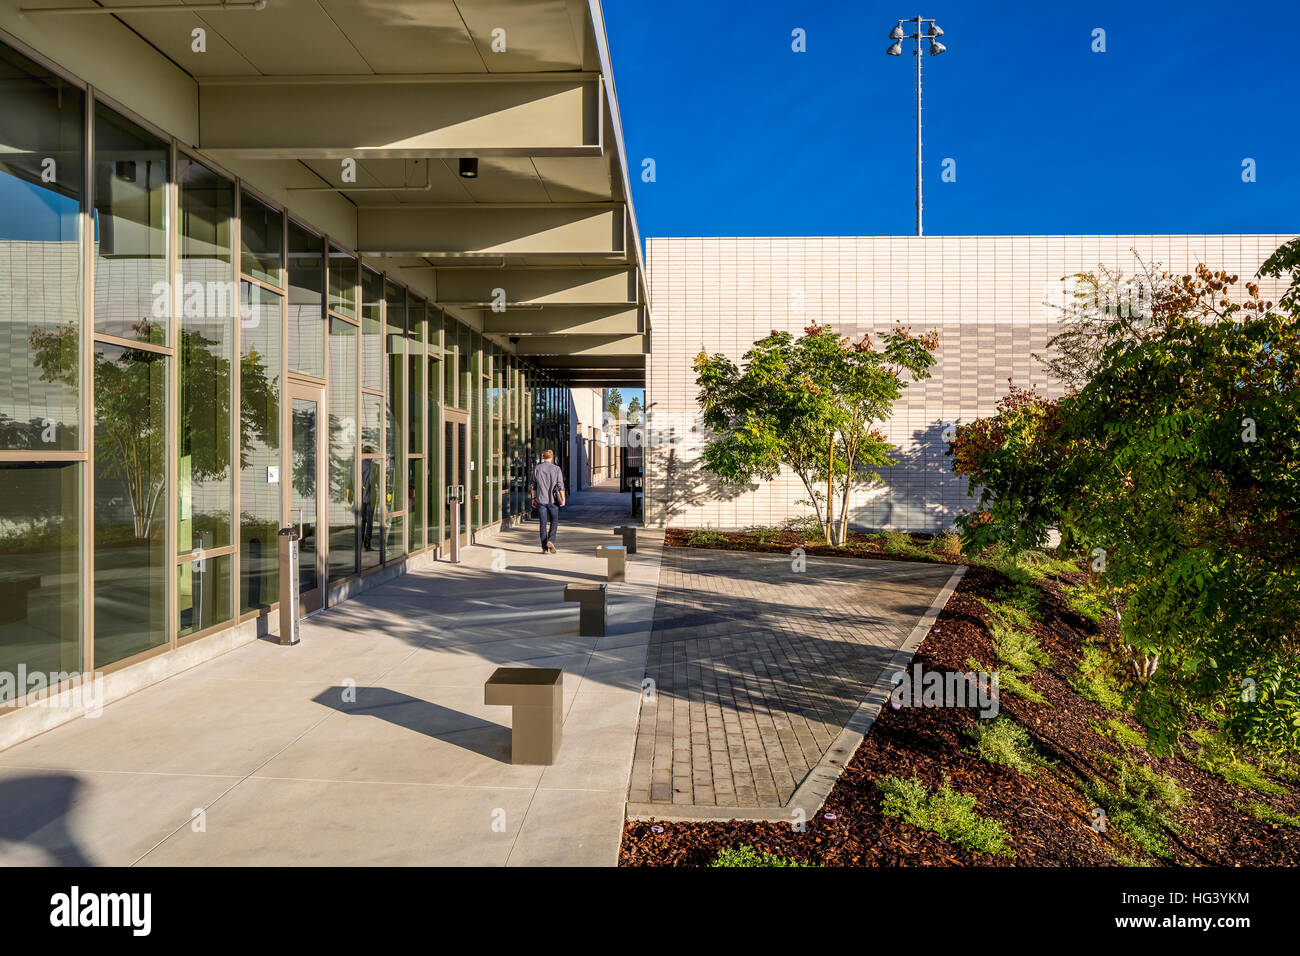 Crafton Hills College in Yucaipa, CA, USA.  Exterior view. Stock Photo